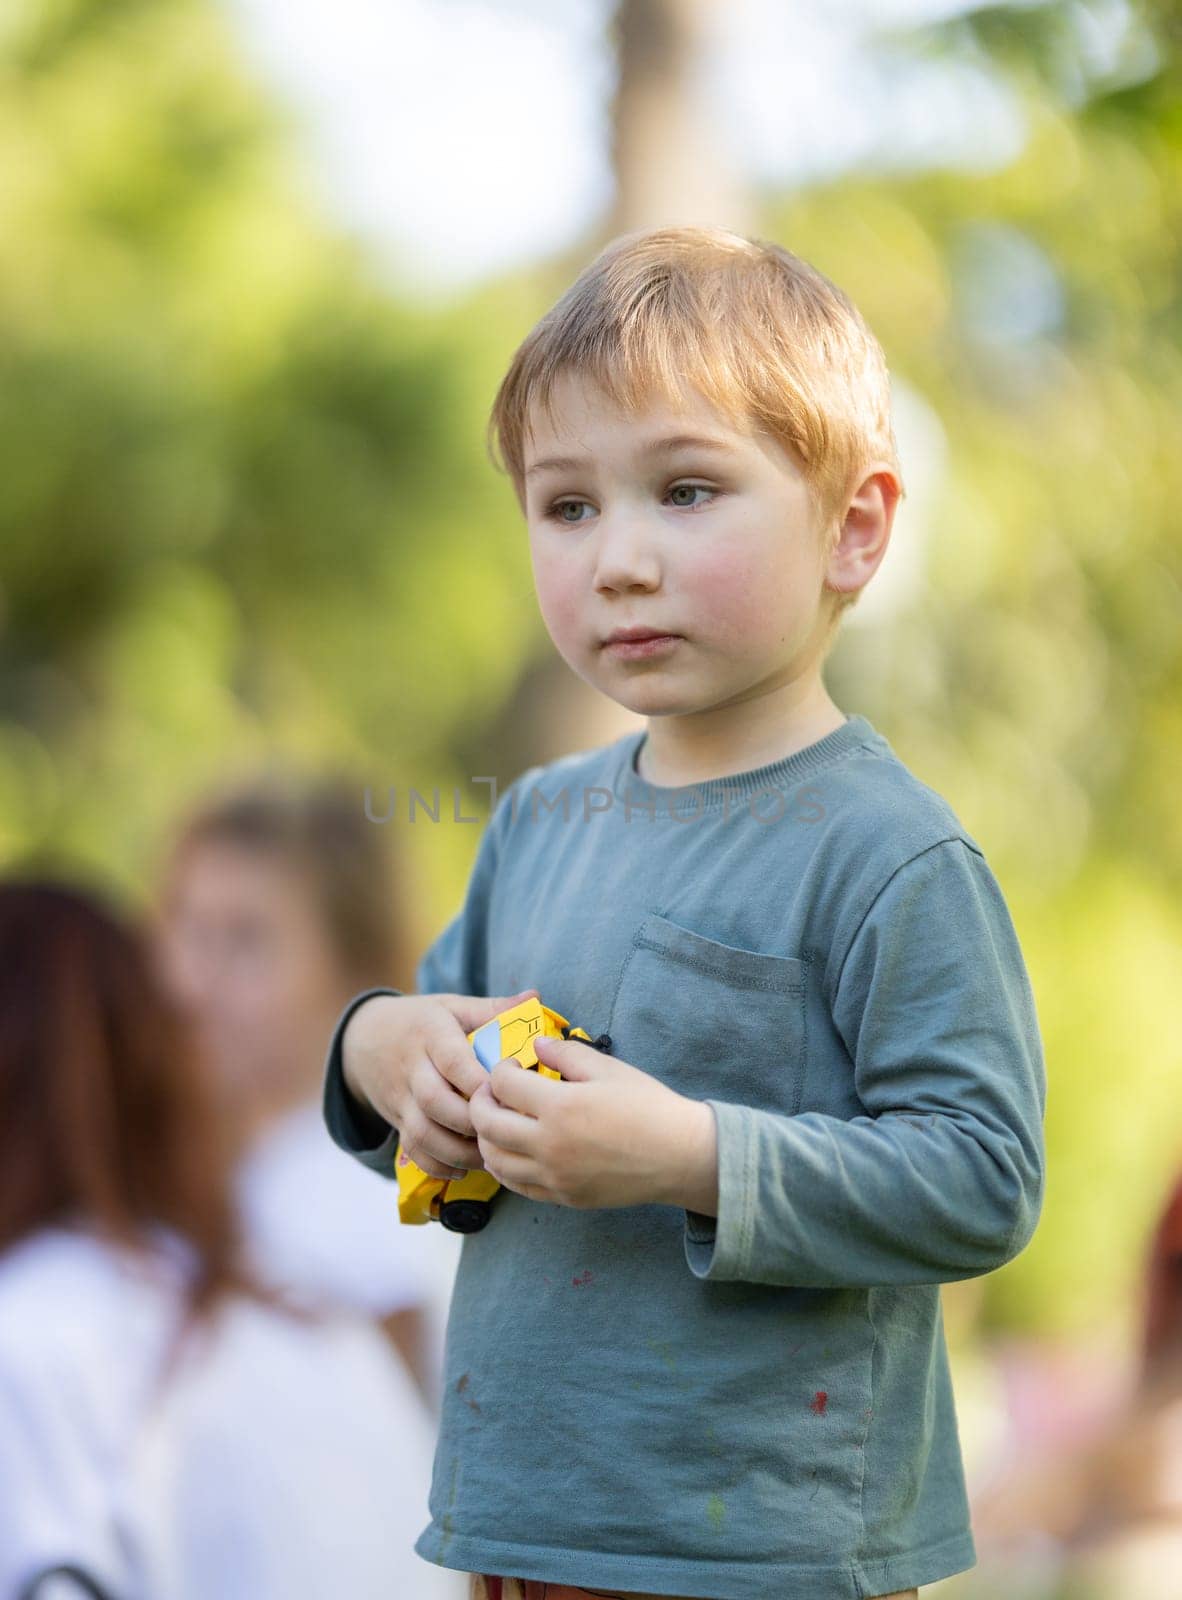 A young boy is holding a toy car in his hand. He is wearing a green shirt and has a serious expression on his face